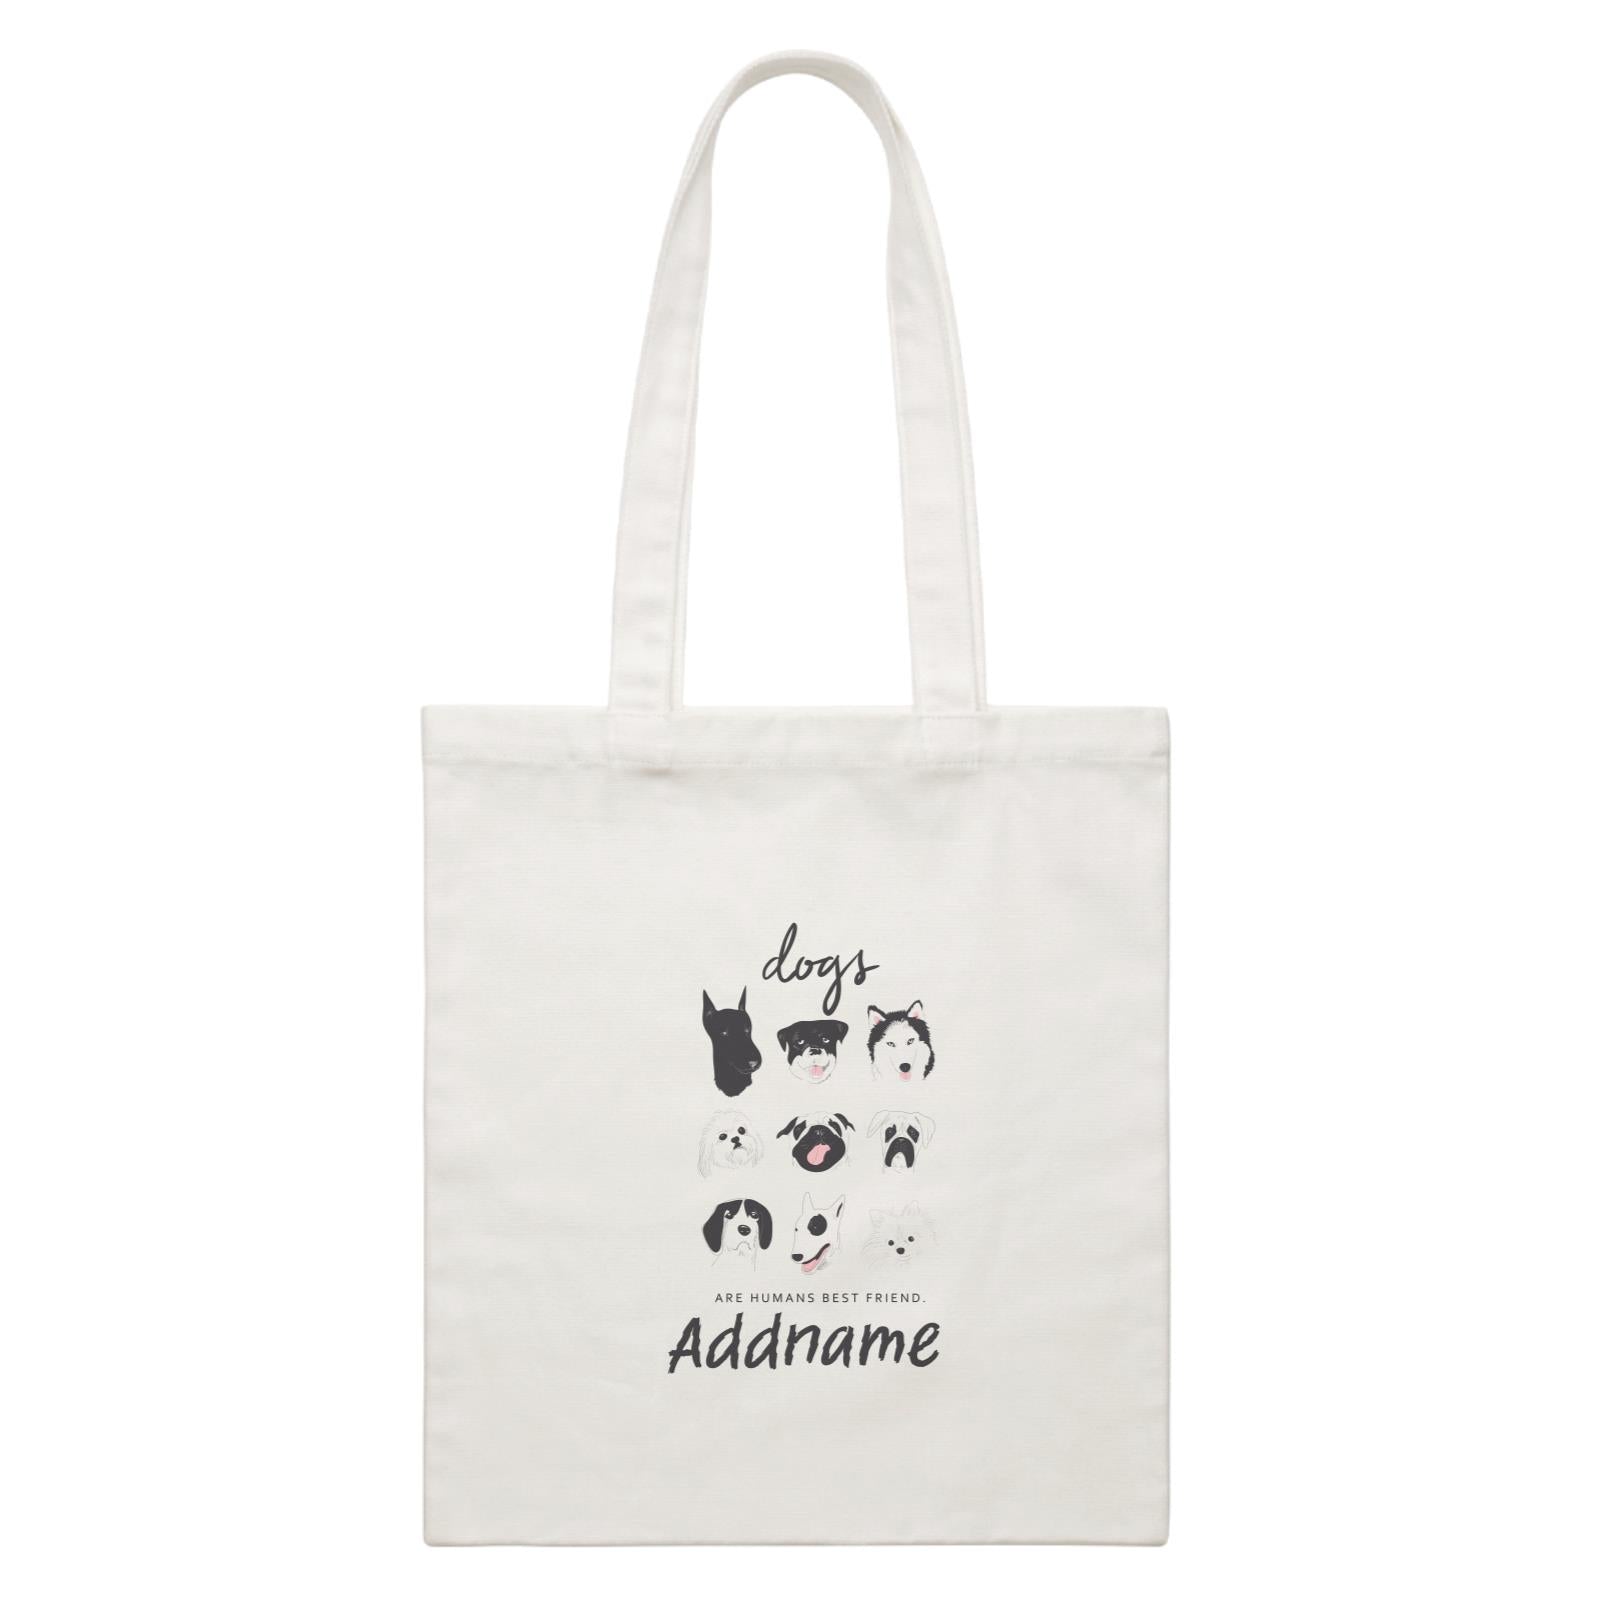 Funny Hand Drawn Animals Dogs Are Human Best Friends With Addname White Canvas Bag